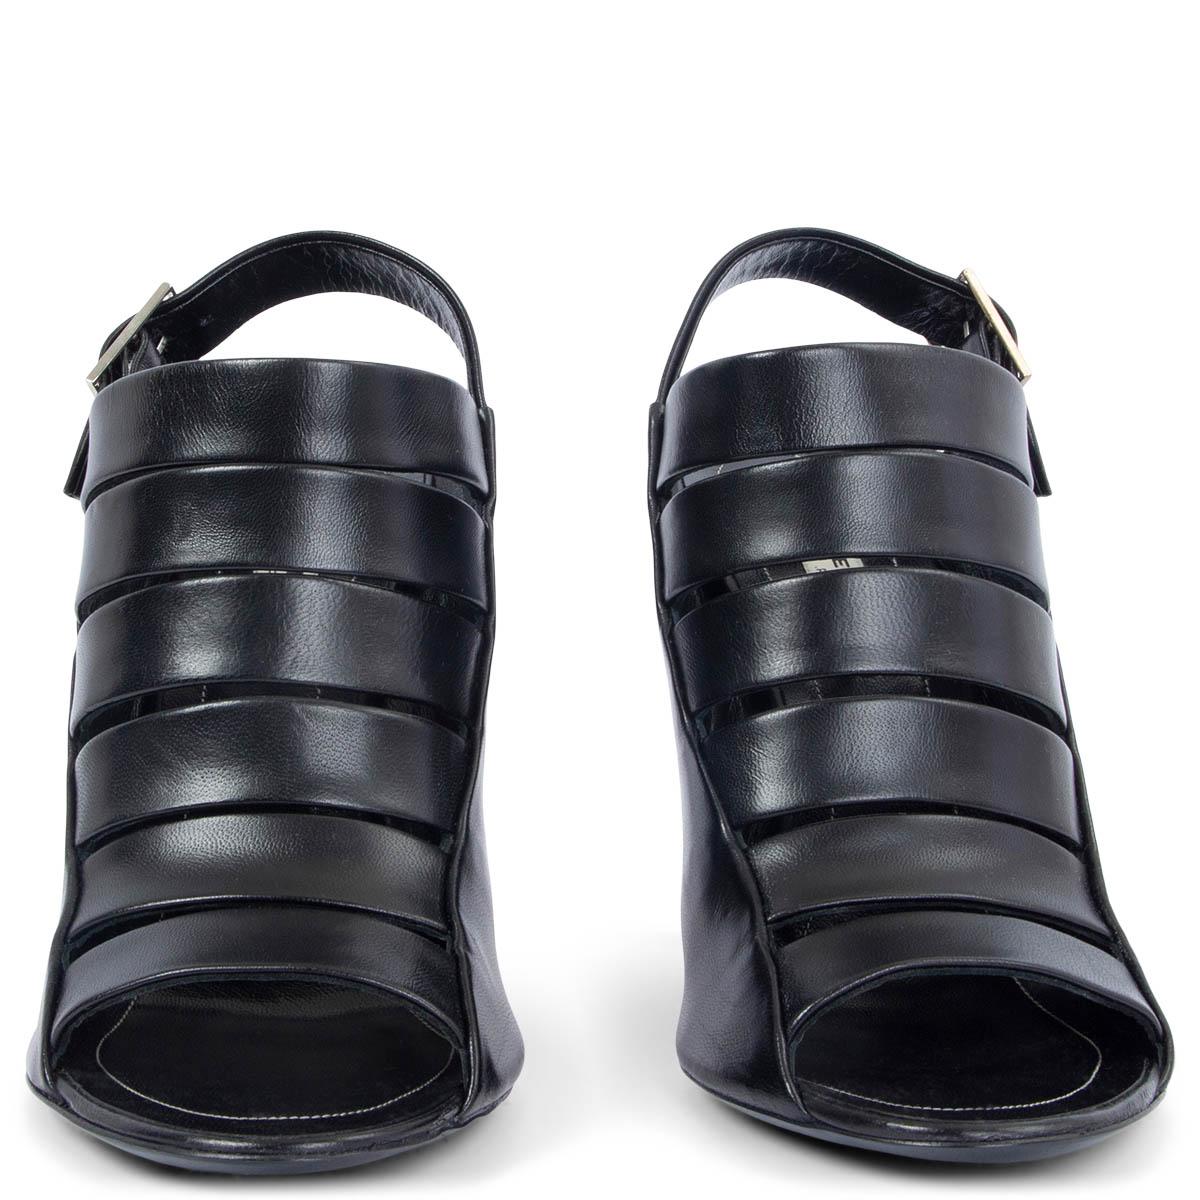 100% authentic Balenciaga sandals in black smooth calfskin with metal buckle closure on the side. Have been worn once inside and are in virtually new condition. Come with dust bag.

Measurements
Imprinted Size	38
Shoe Size	38
Inside Sole	24.5cm